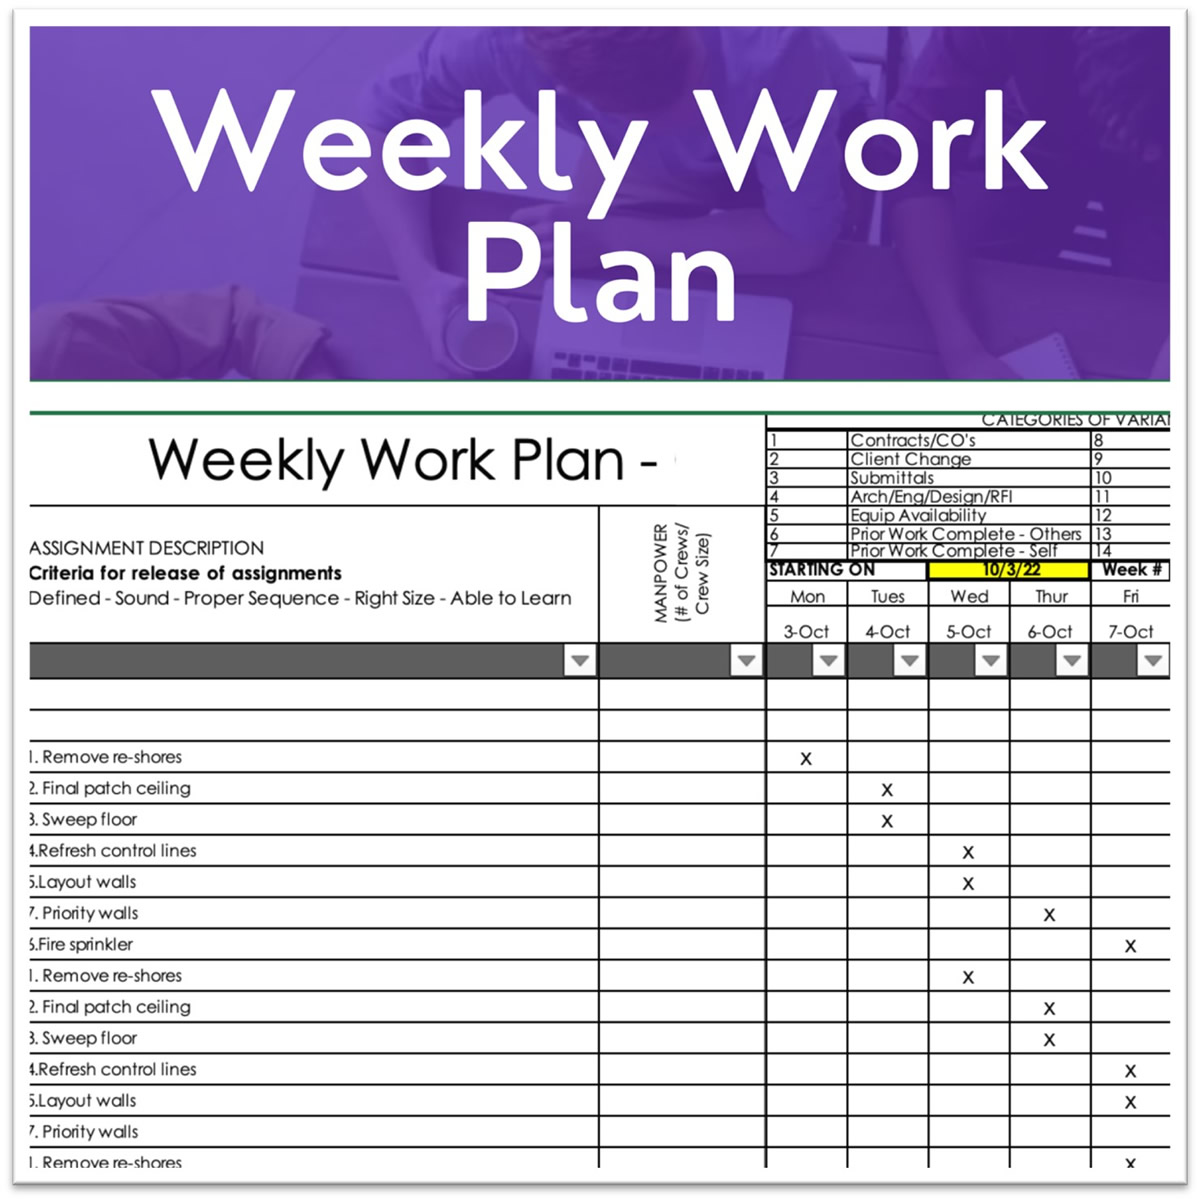 Image of a weekly work plan.